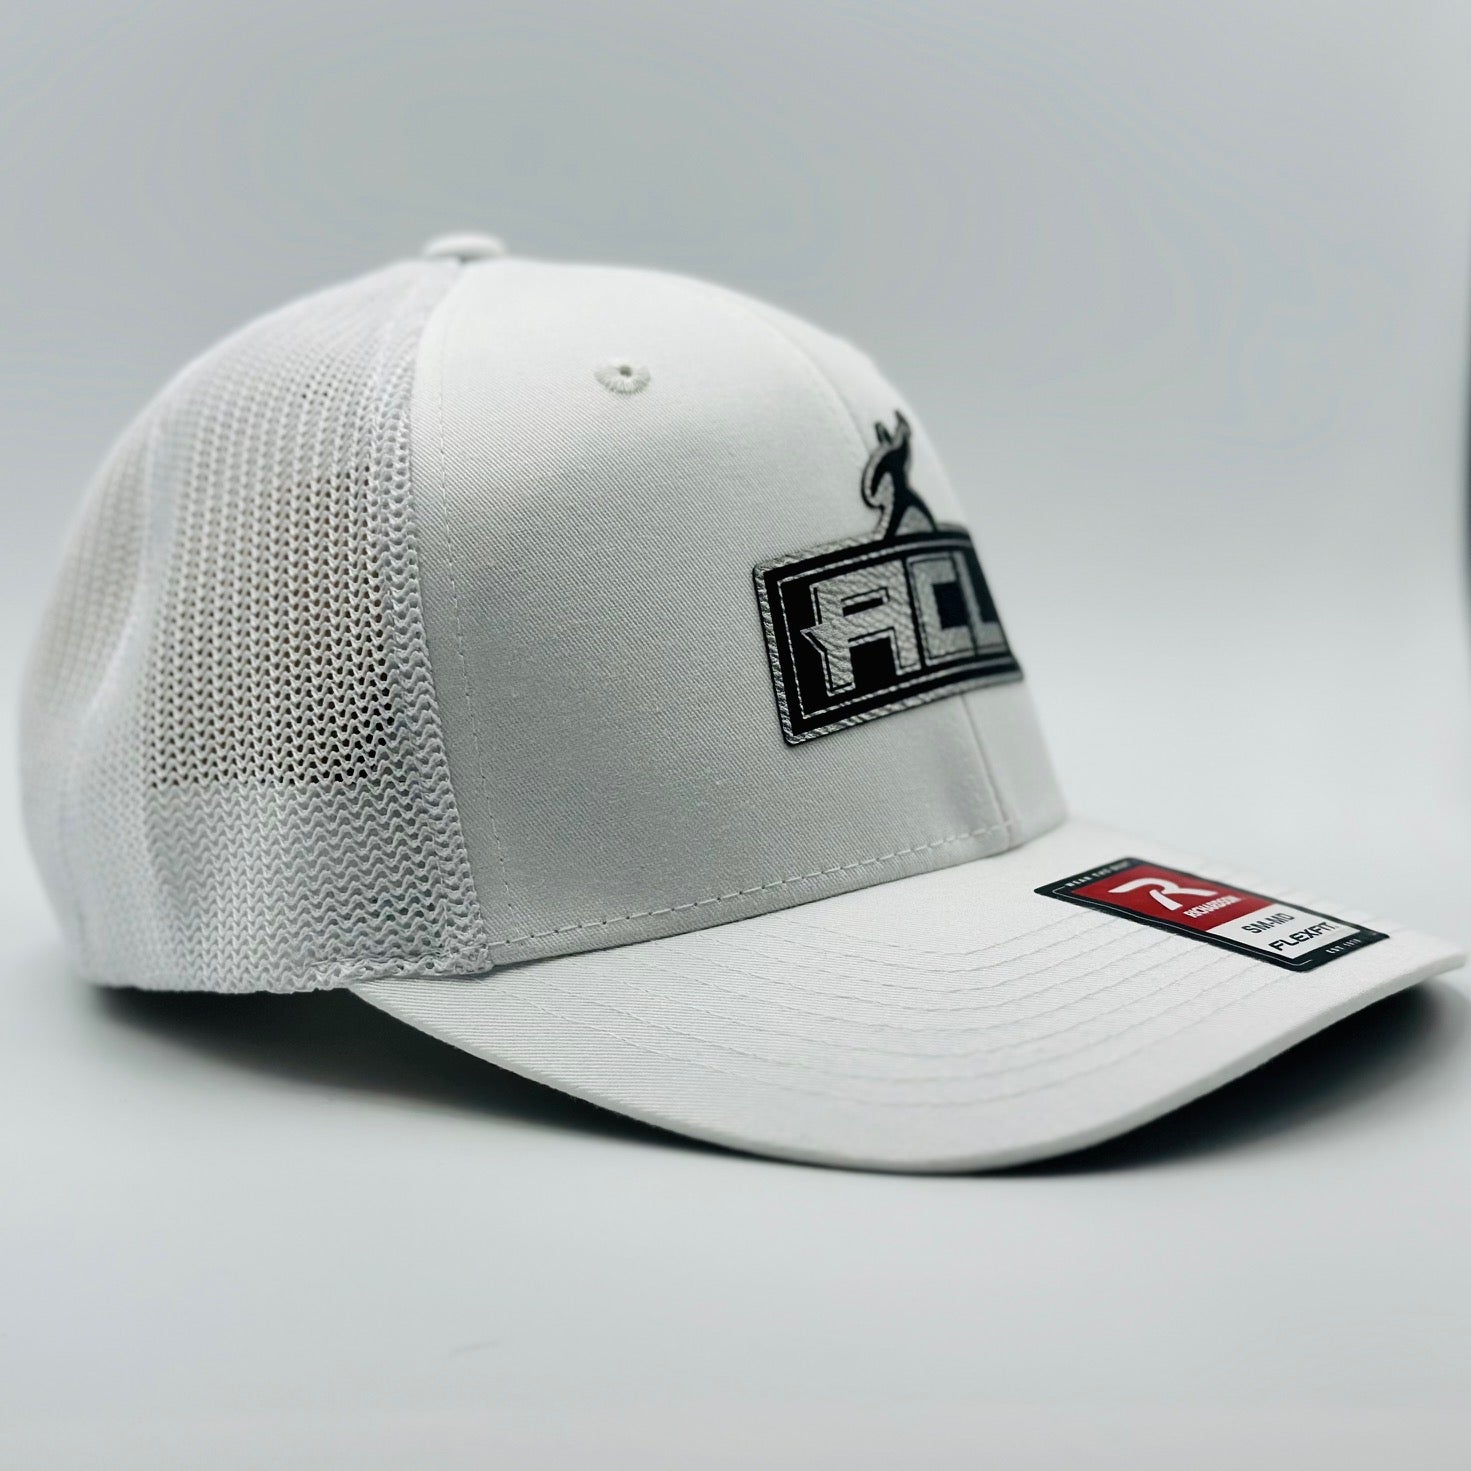 White Flex Hat With Sliver Patch